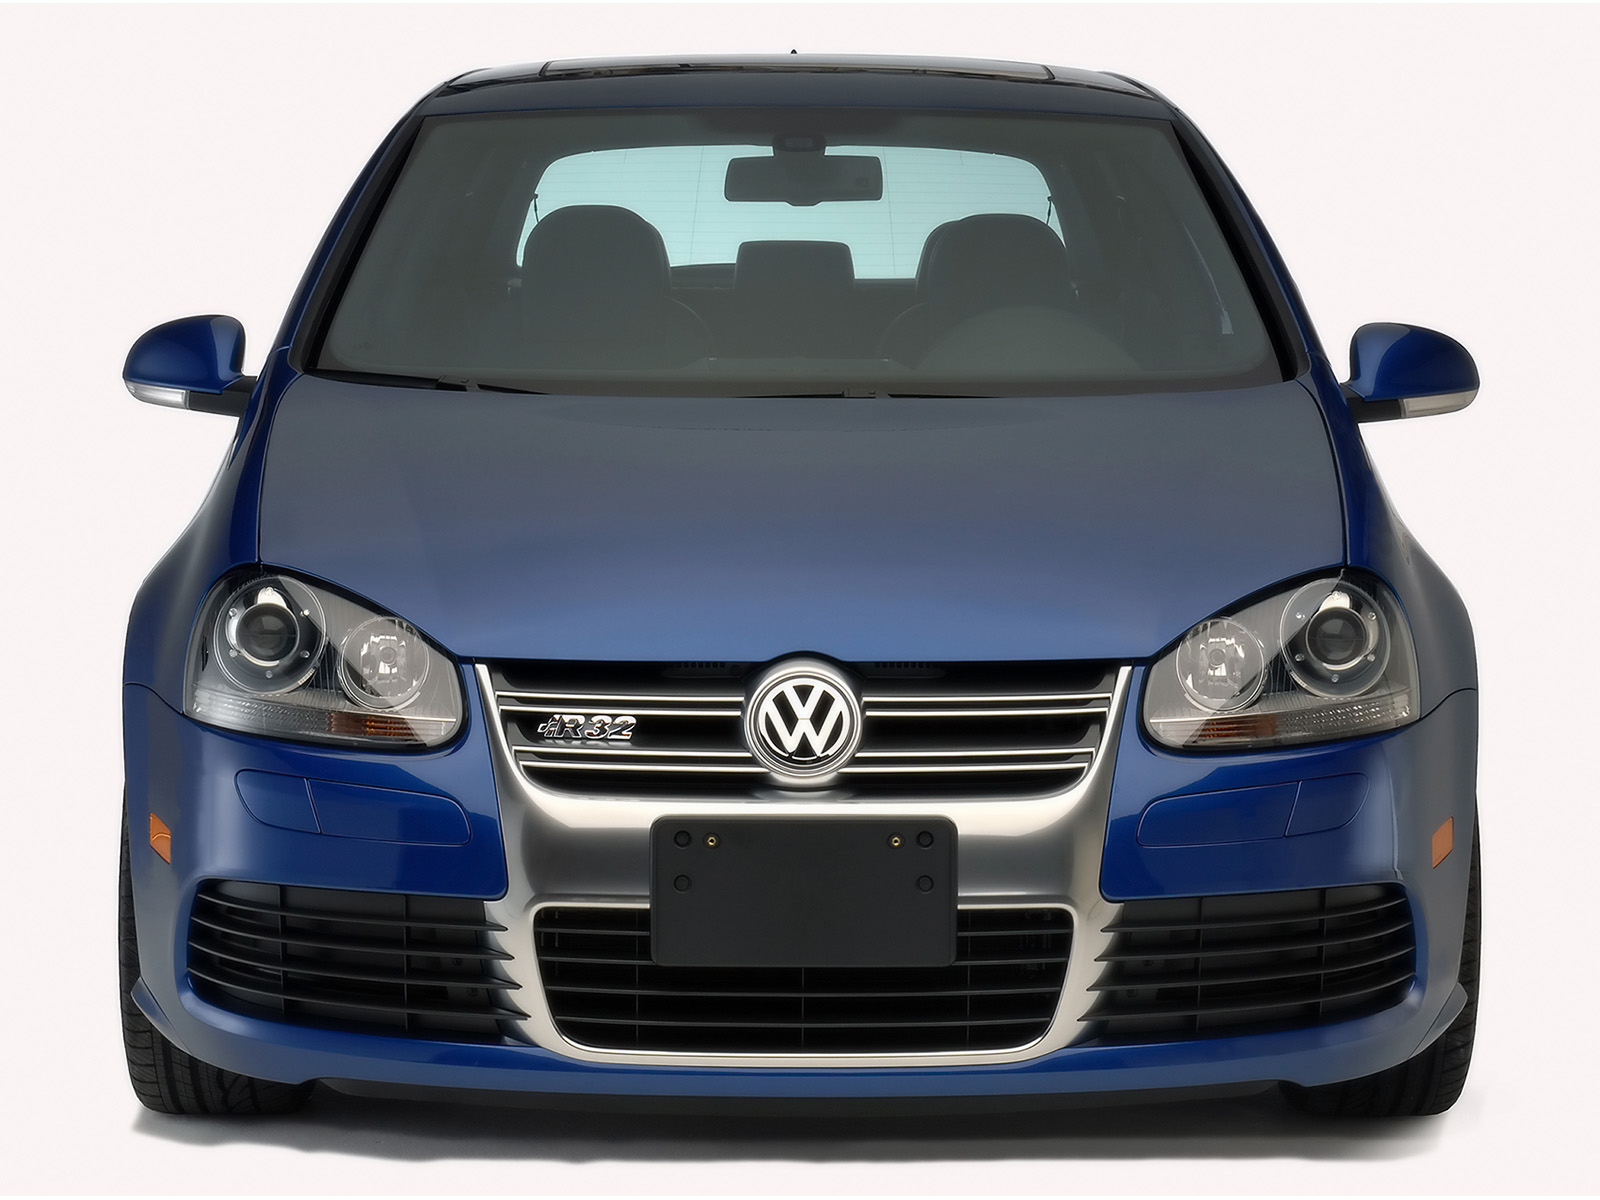 You can vote for this Volkswagen R32 photo